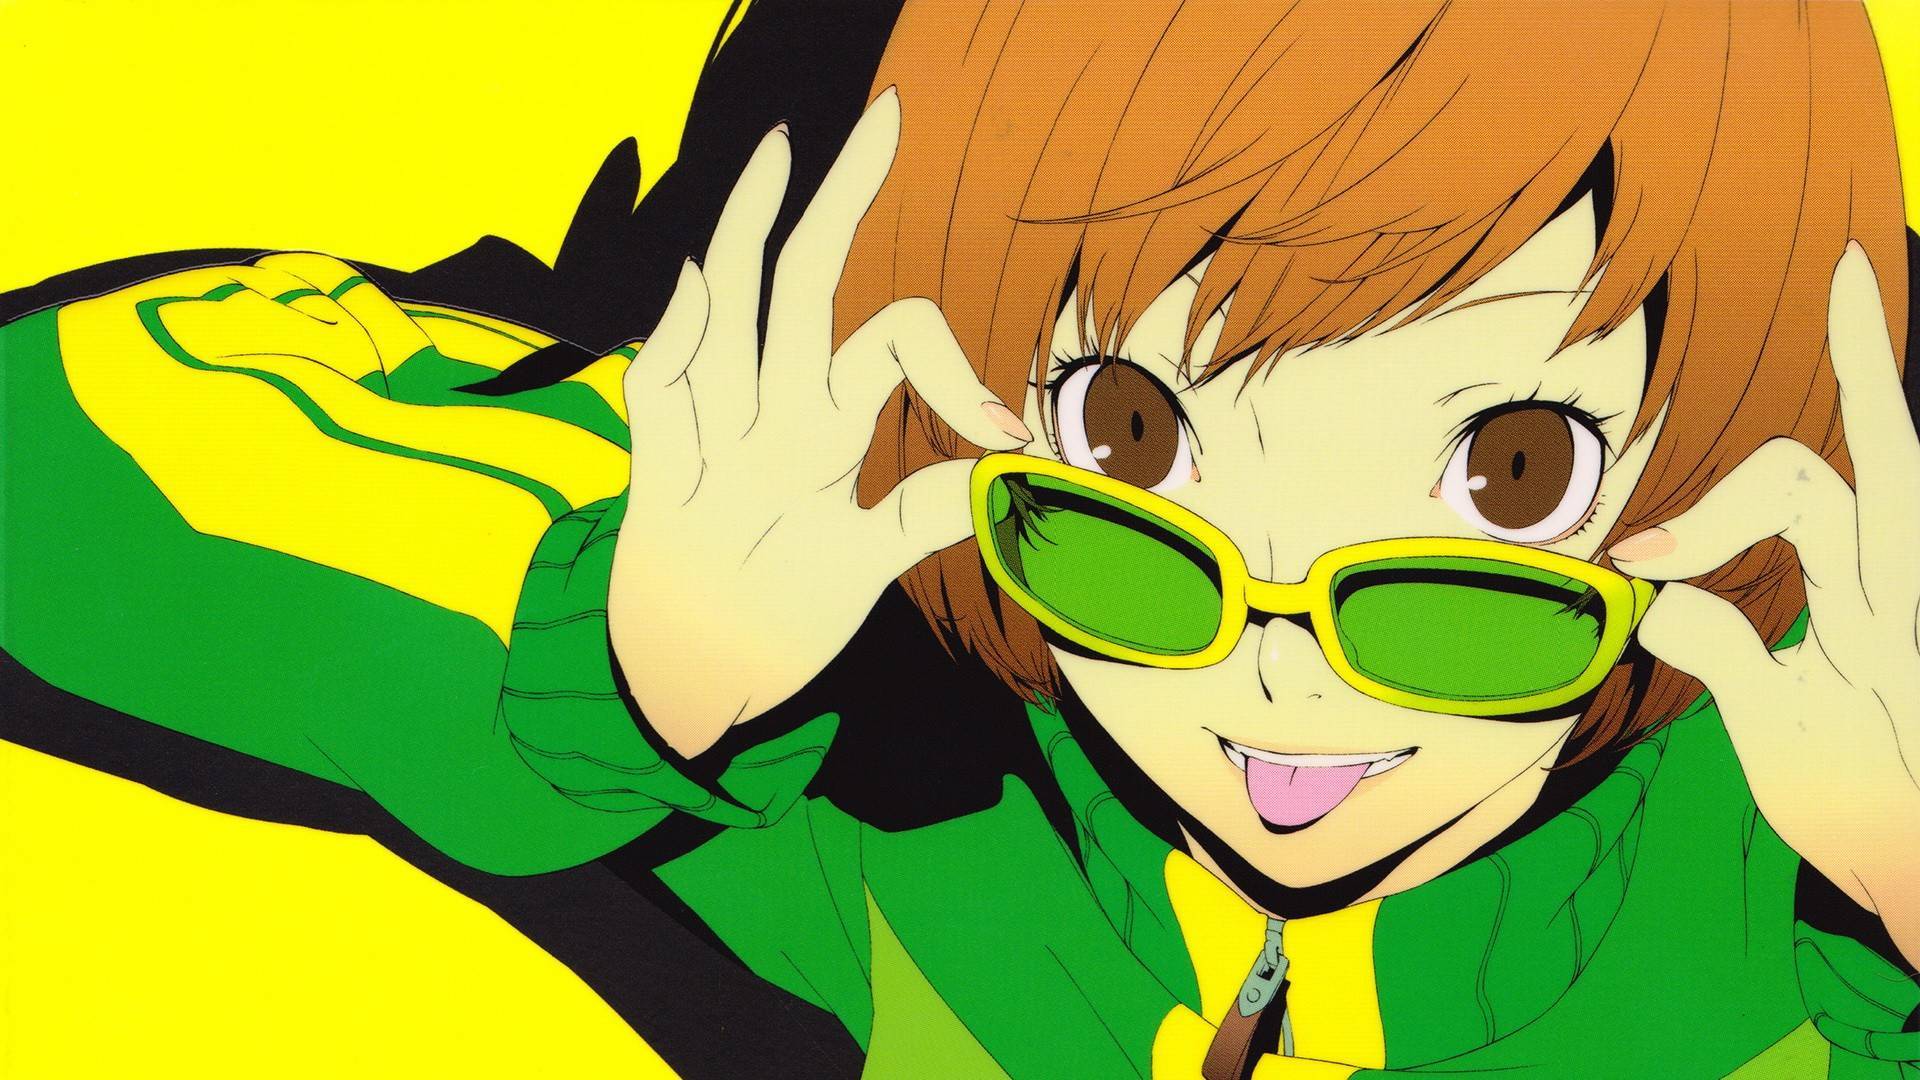 Persona 4 Chie’s personality, voice actors, and more - TrendRadars